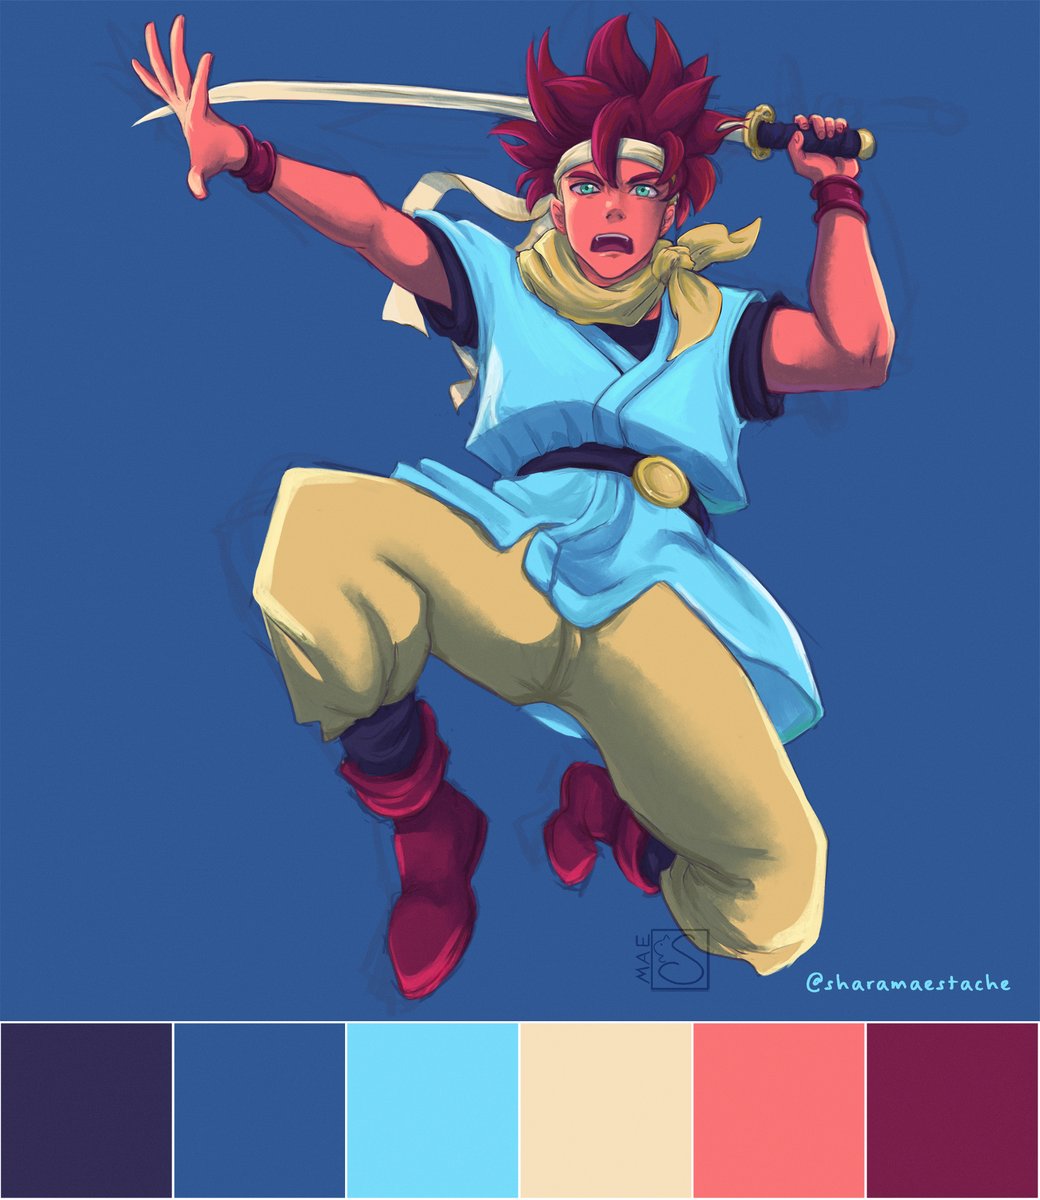 Today's colour practice featuring Crono himself
#ChronoTrigger